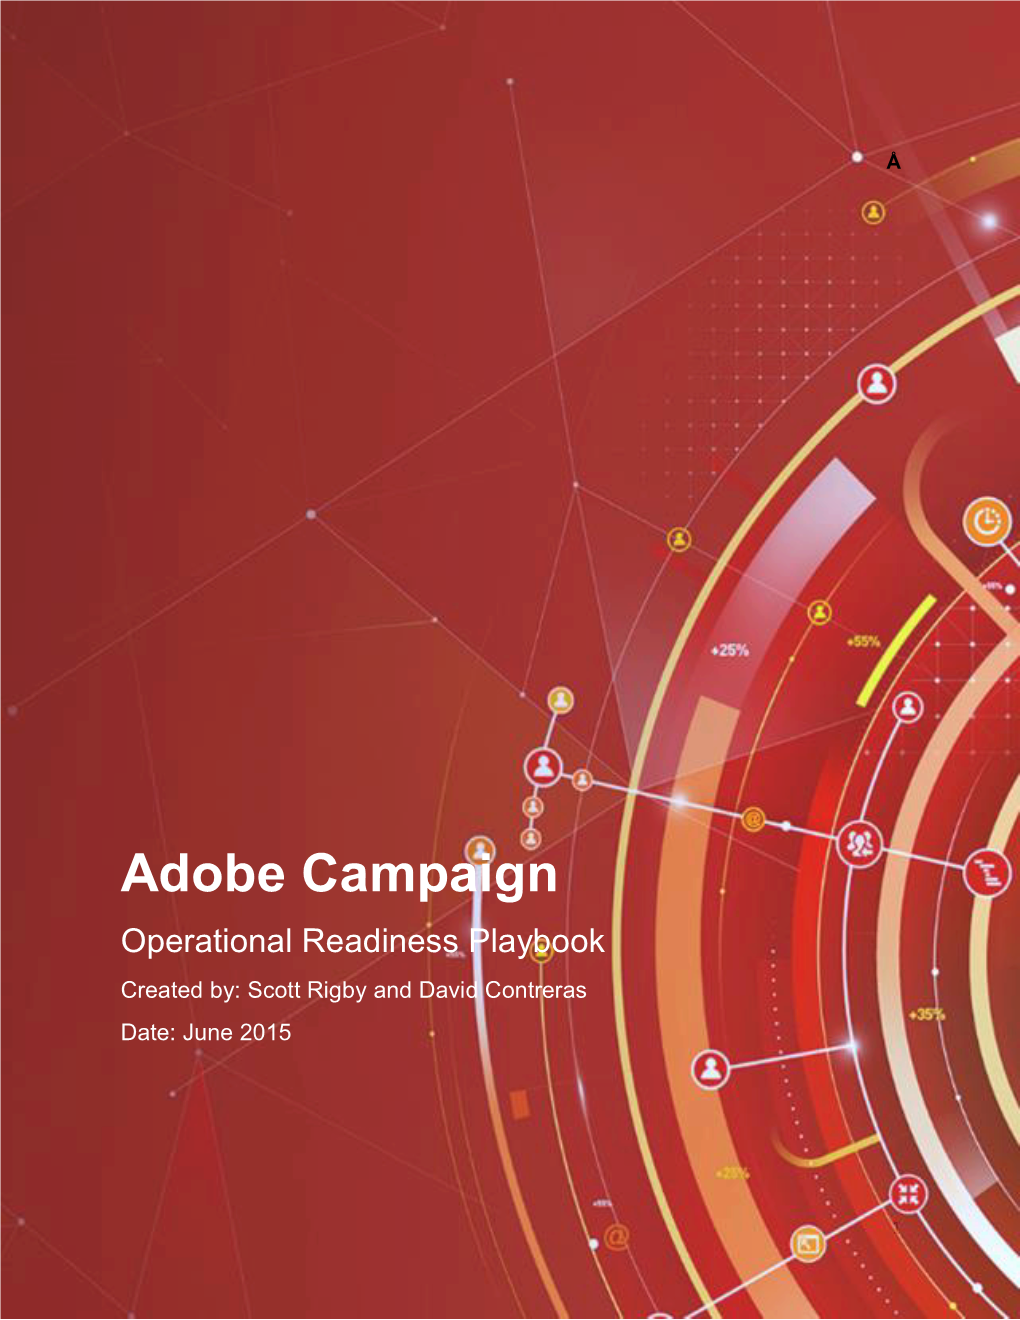 Adobe Campaign Operational Readiness Playbook Created By: Scott Rigby and David Contreras Date: June 2015